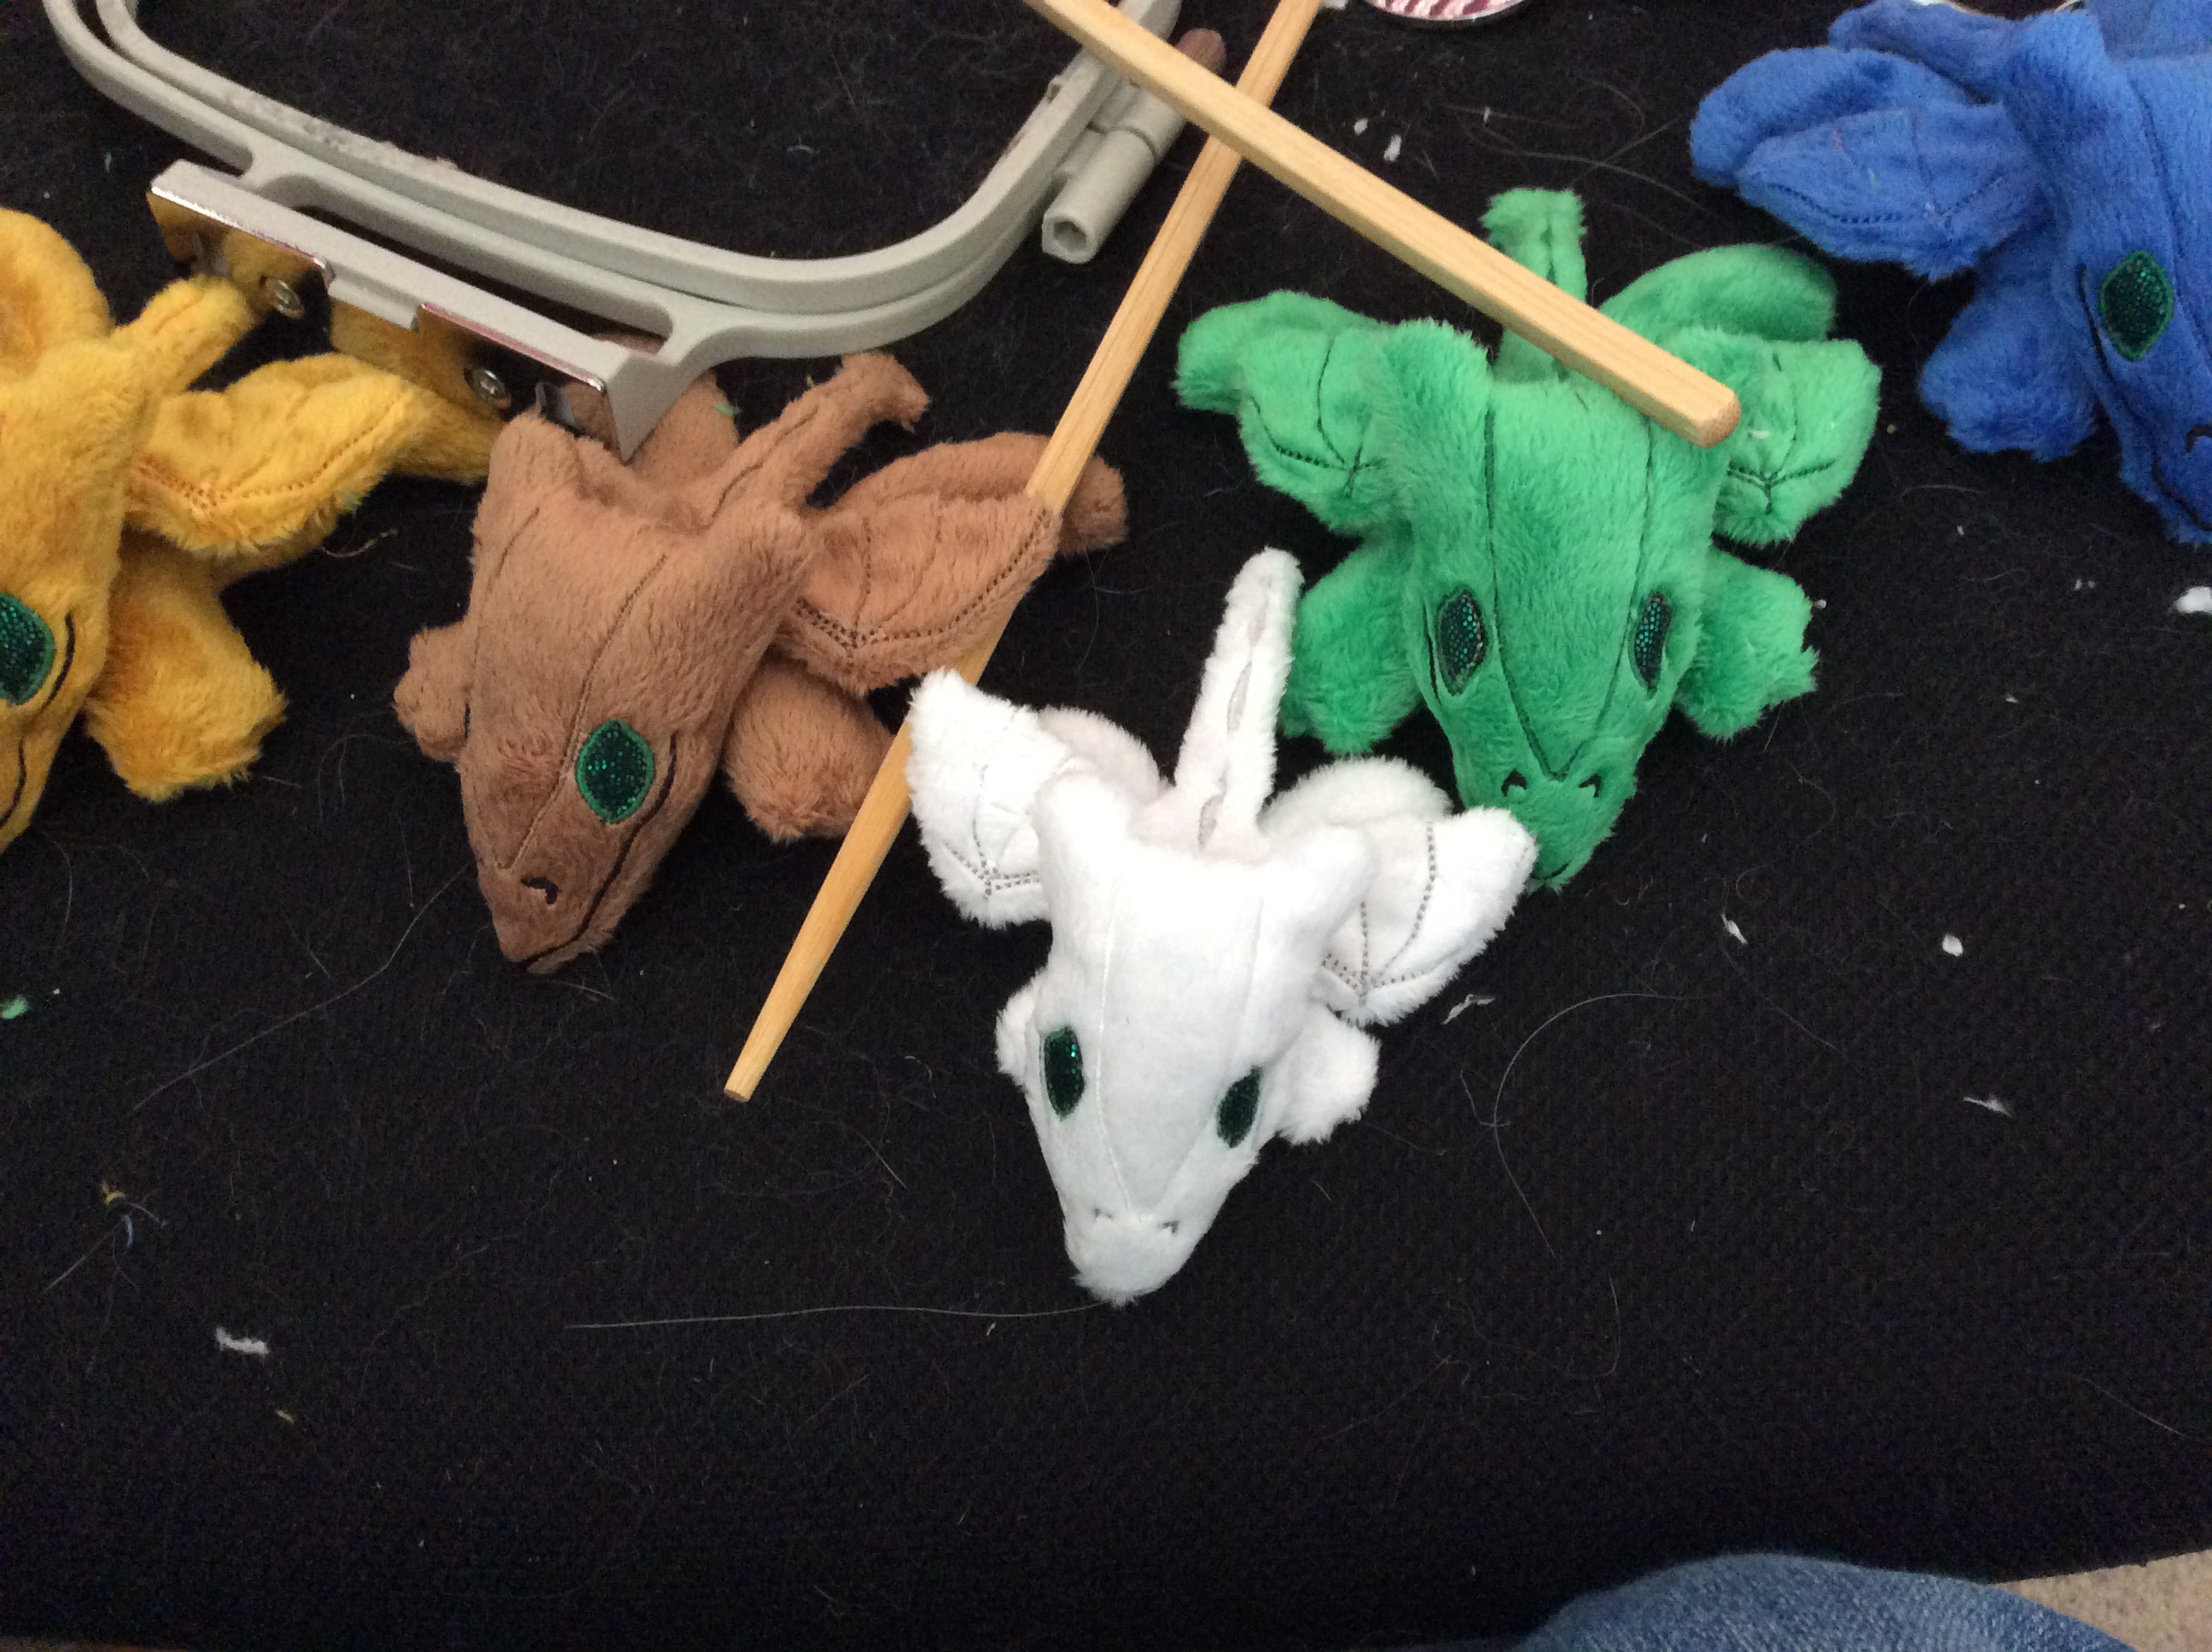 Plush dragons and sewing tools, in progress.